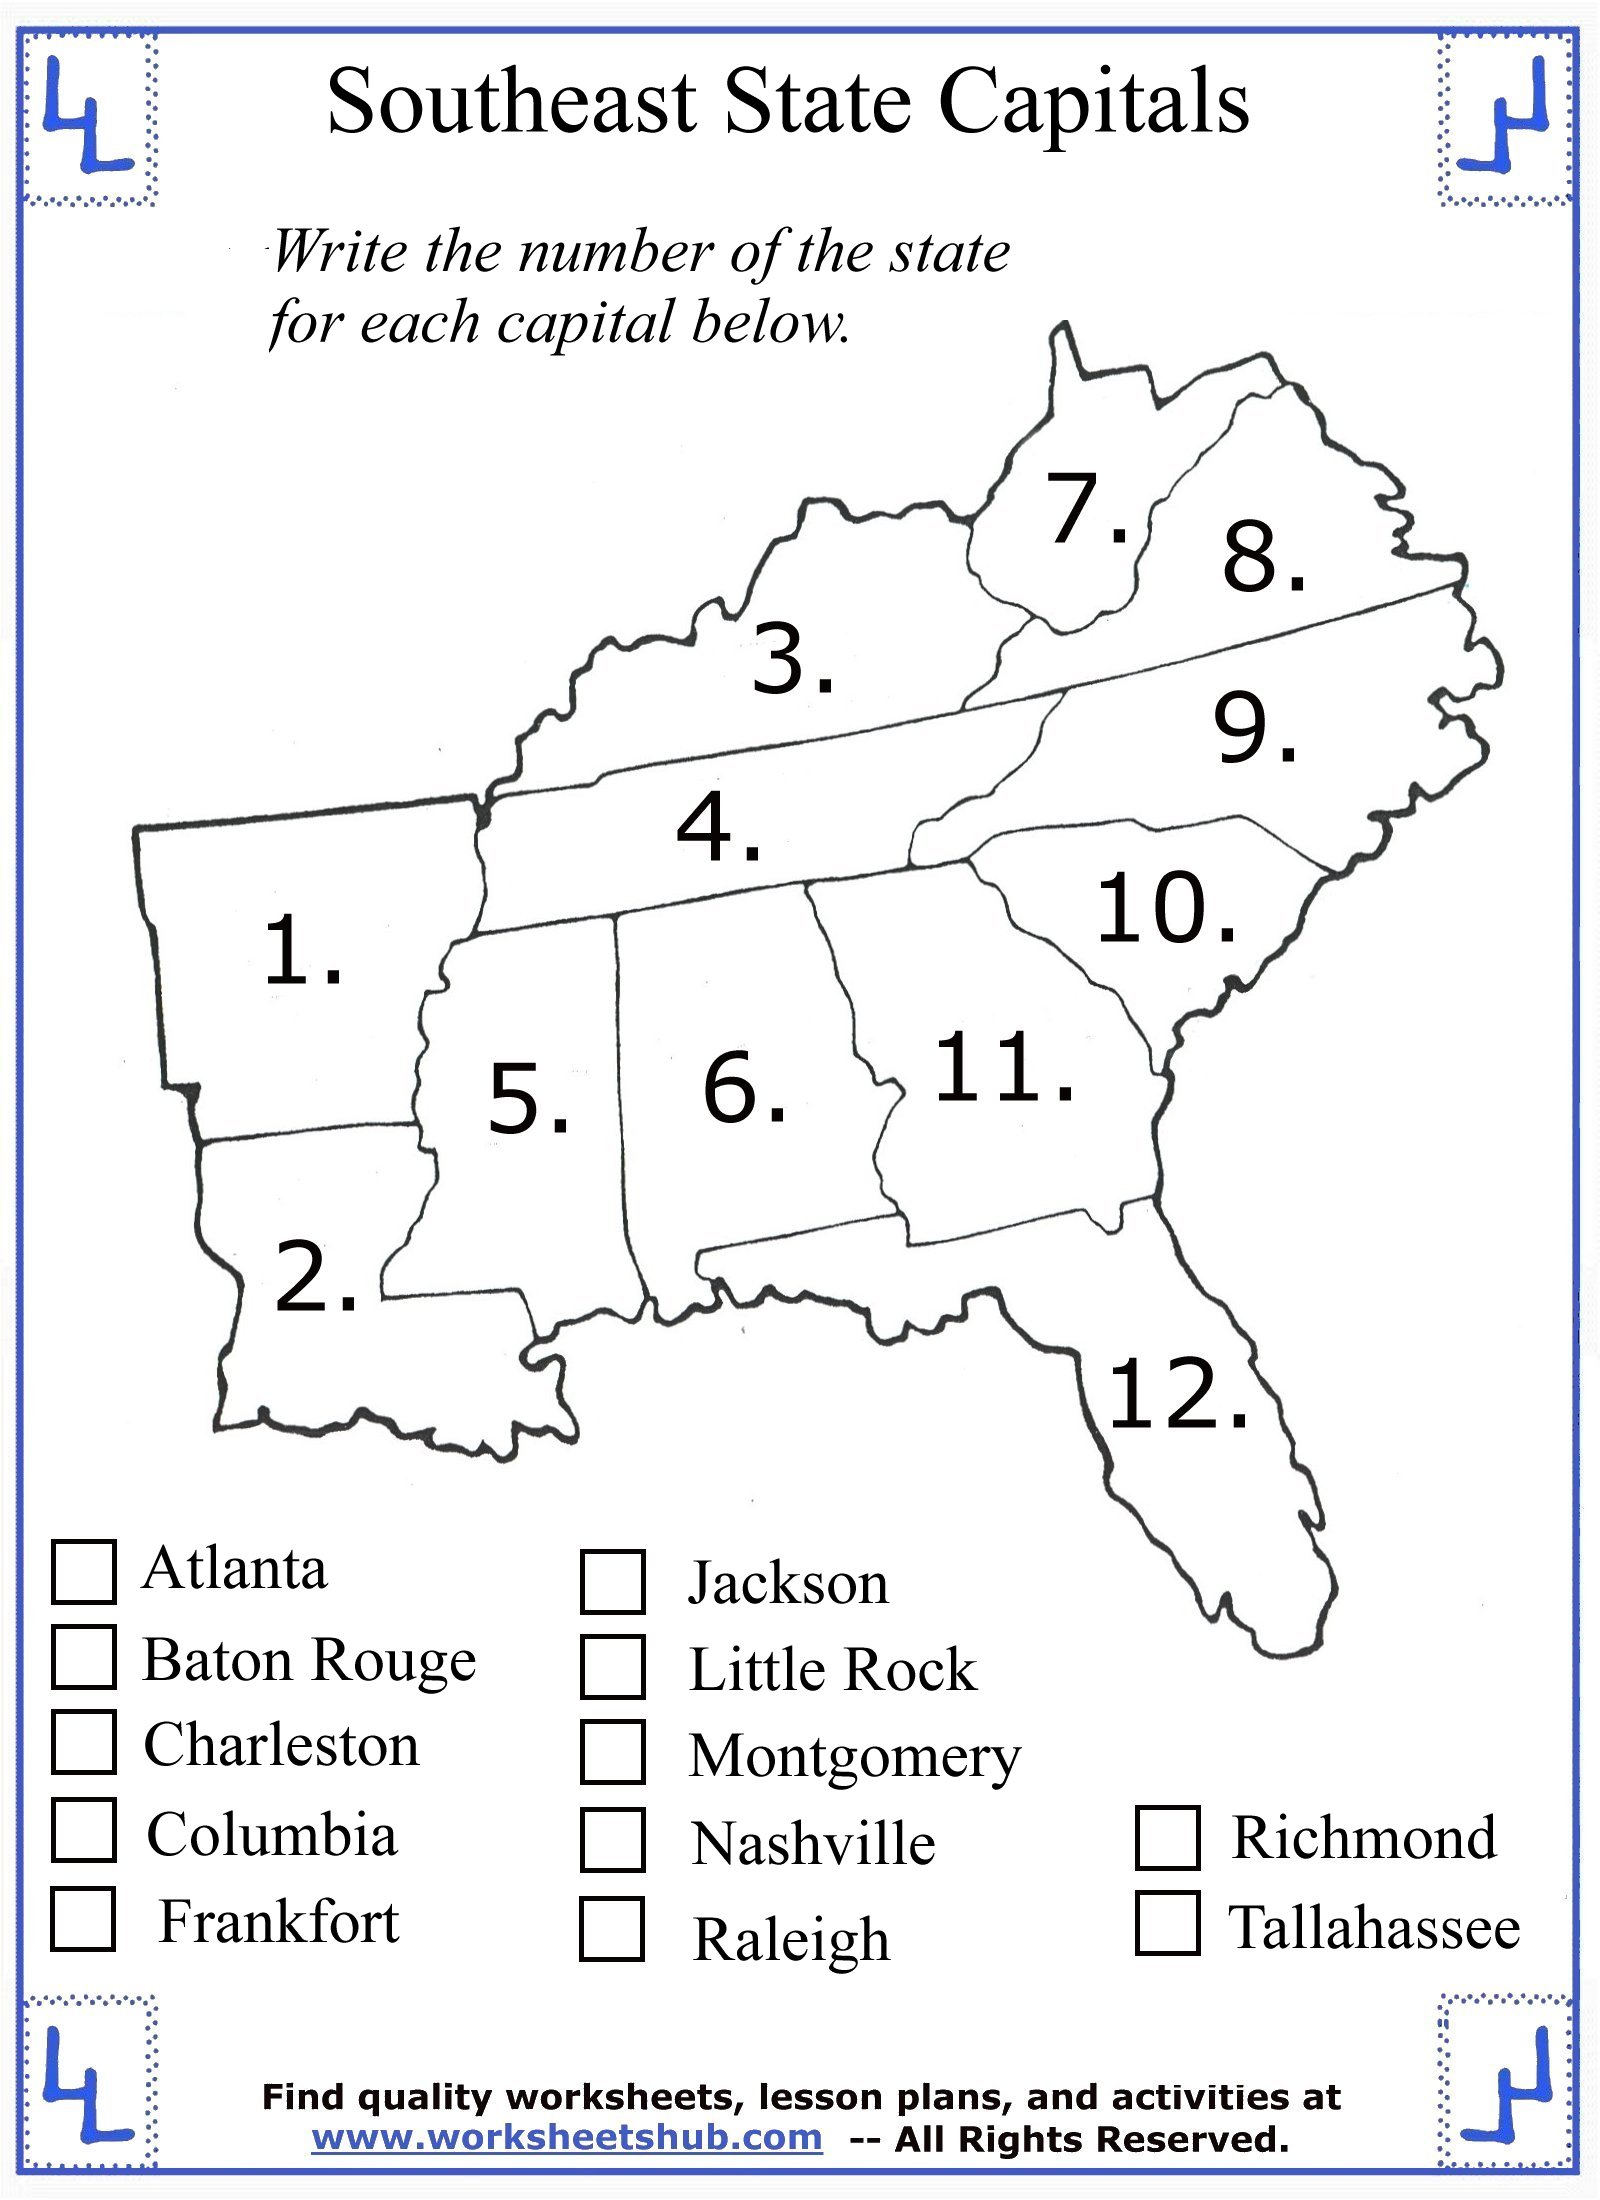 southeast-states-and-capitals-quiz-printable-free-printable-templates